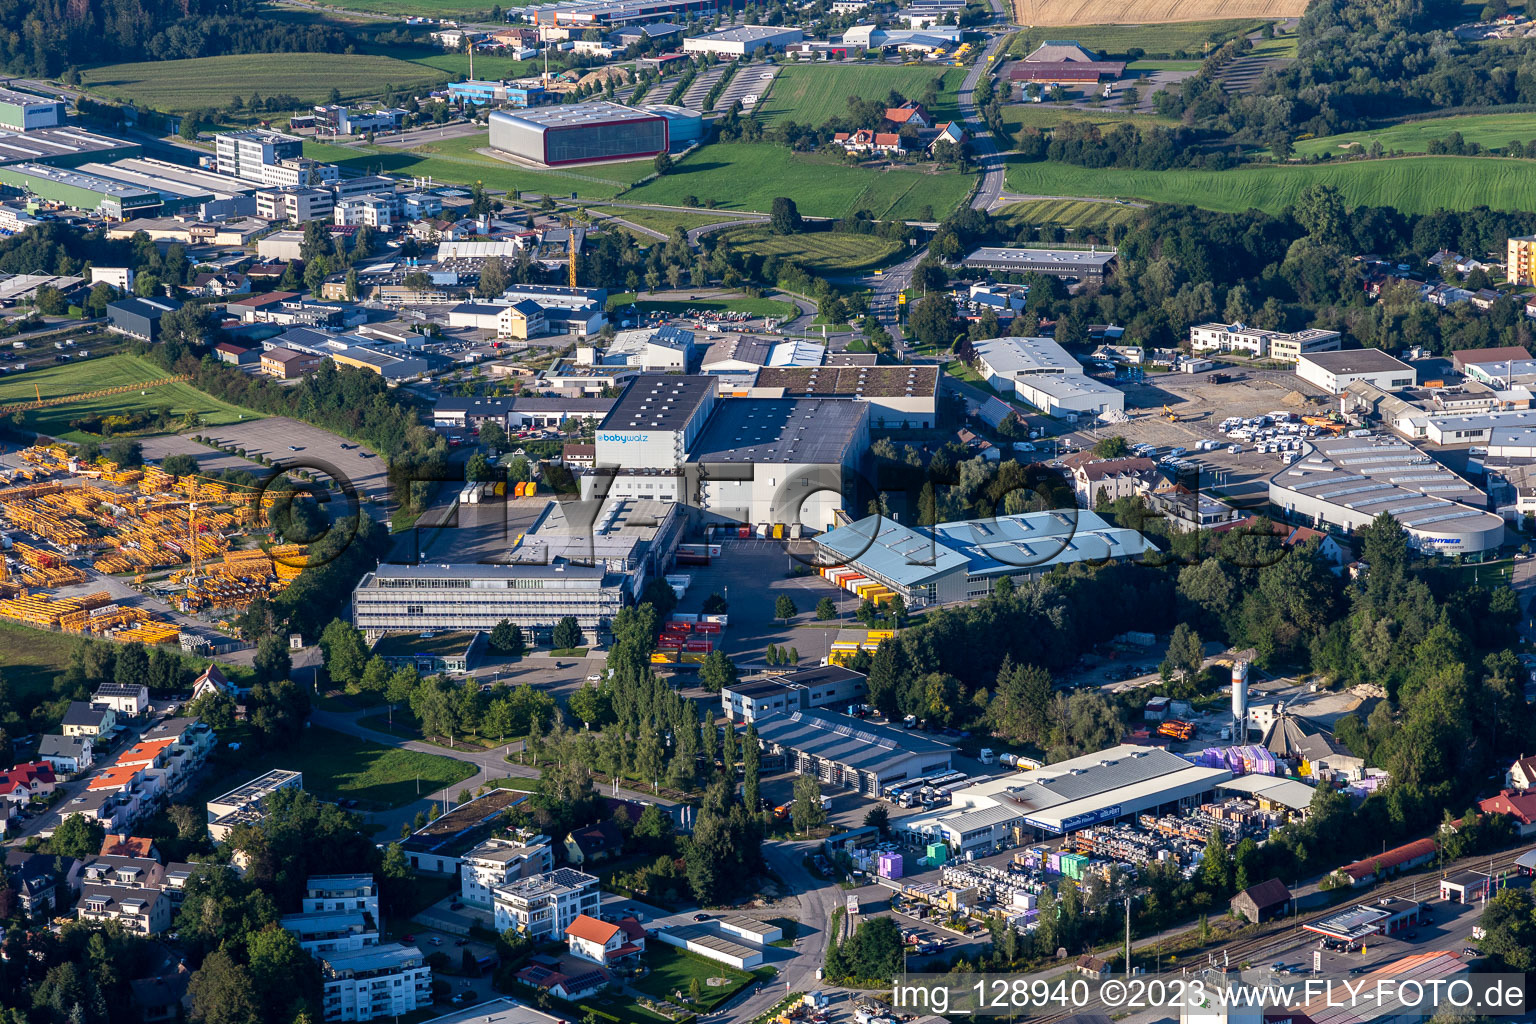 Oblique view of Building complex and distribution center on the site of Versandhaus Walz GmbH, Baby-Walz in Bad Waldsee in the state Baden-Wuerttemberg, Germany